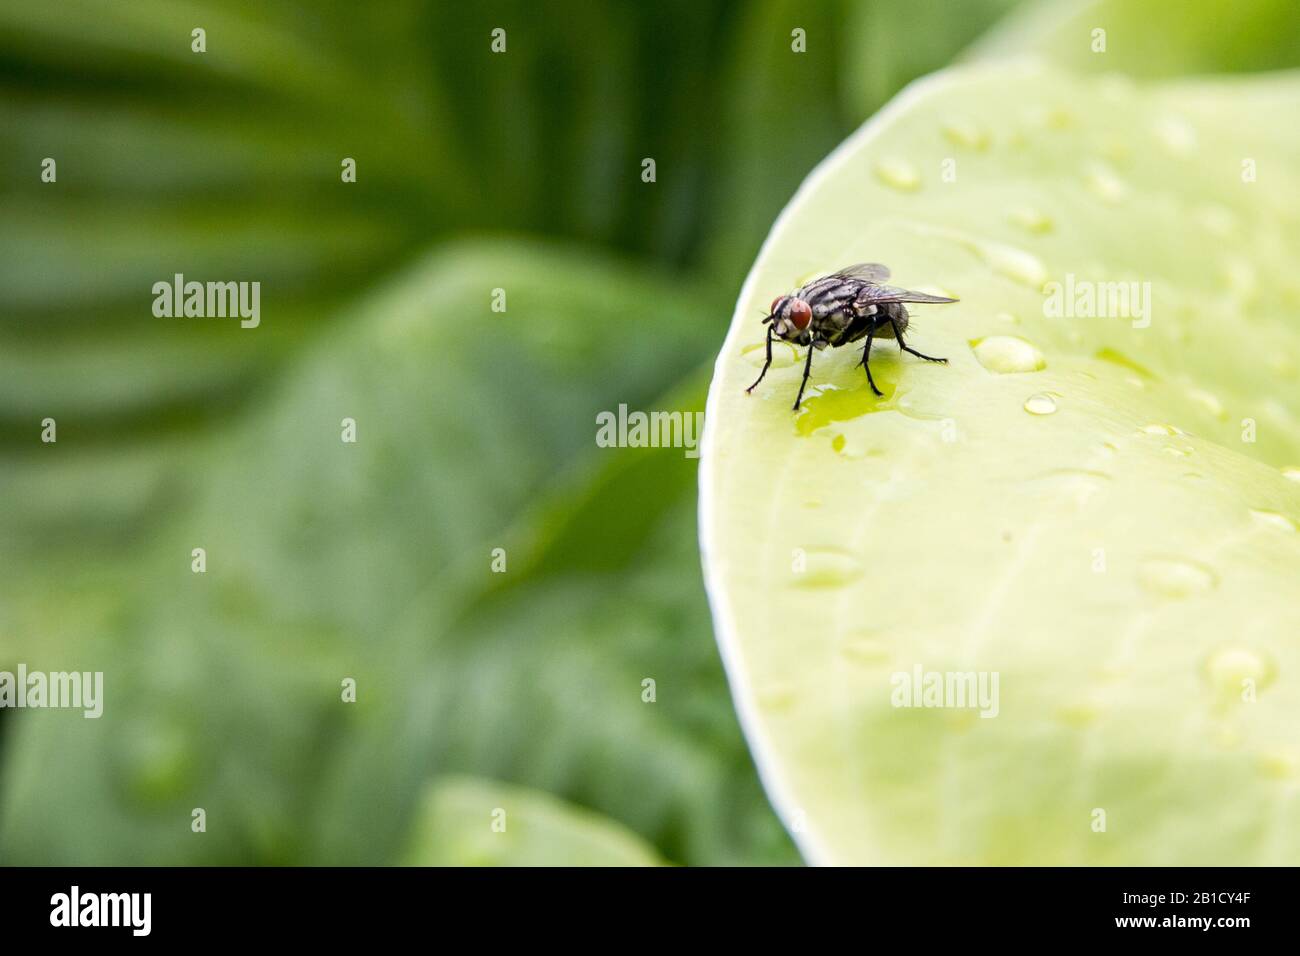 sarcophaga carnaria, also called the common flesh fly, or the european fly, laying alone on a green leaf, on a macro shot, while some drops of water f Stock Photo